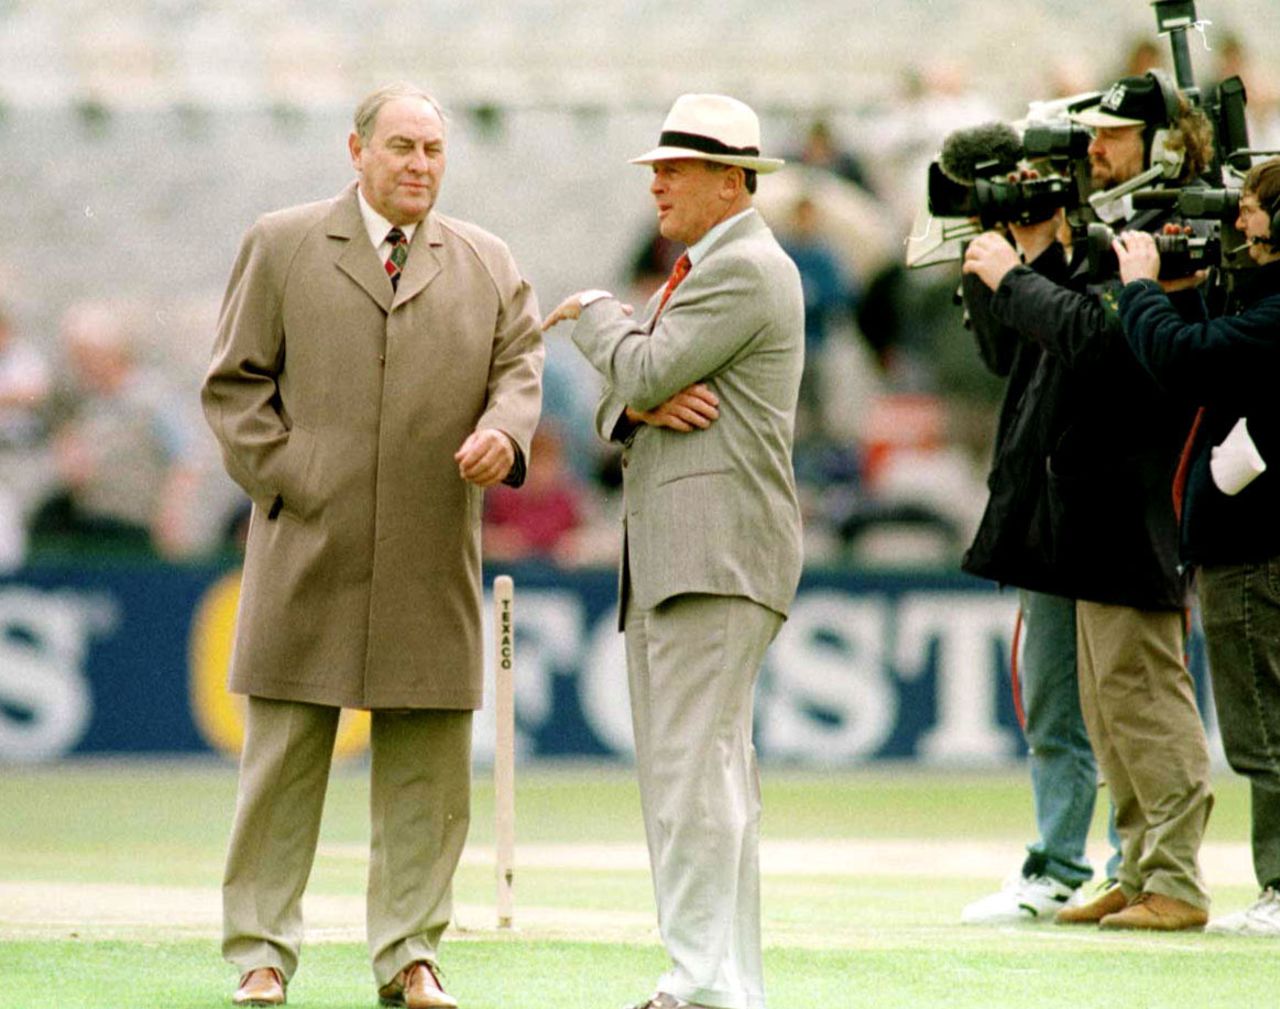 England chairman of selectors Ray Illingworth (left) talks to Geoffrey Boycott before the start of play, England v India, third ODI, Old Trafford, May 27, 1996 
